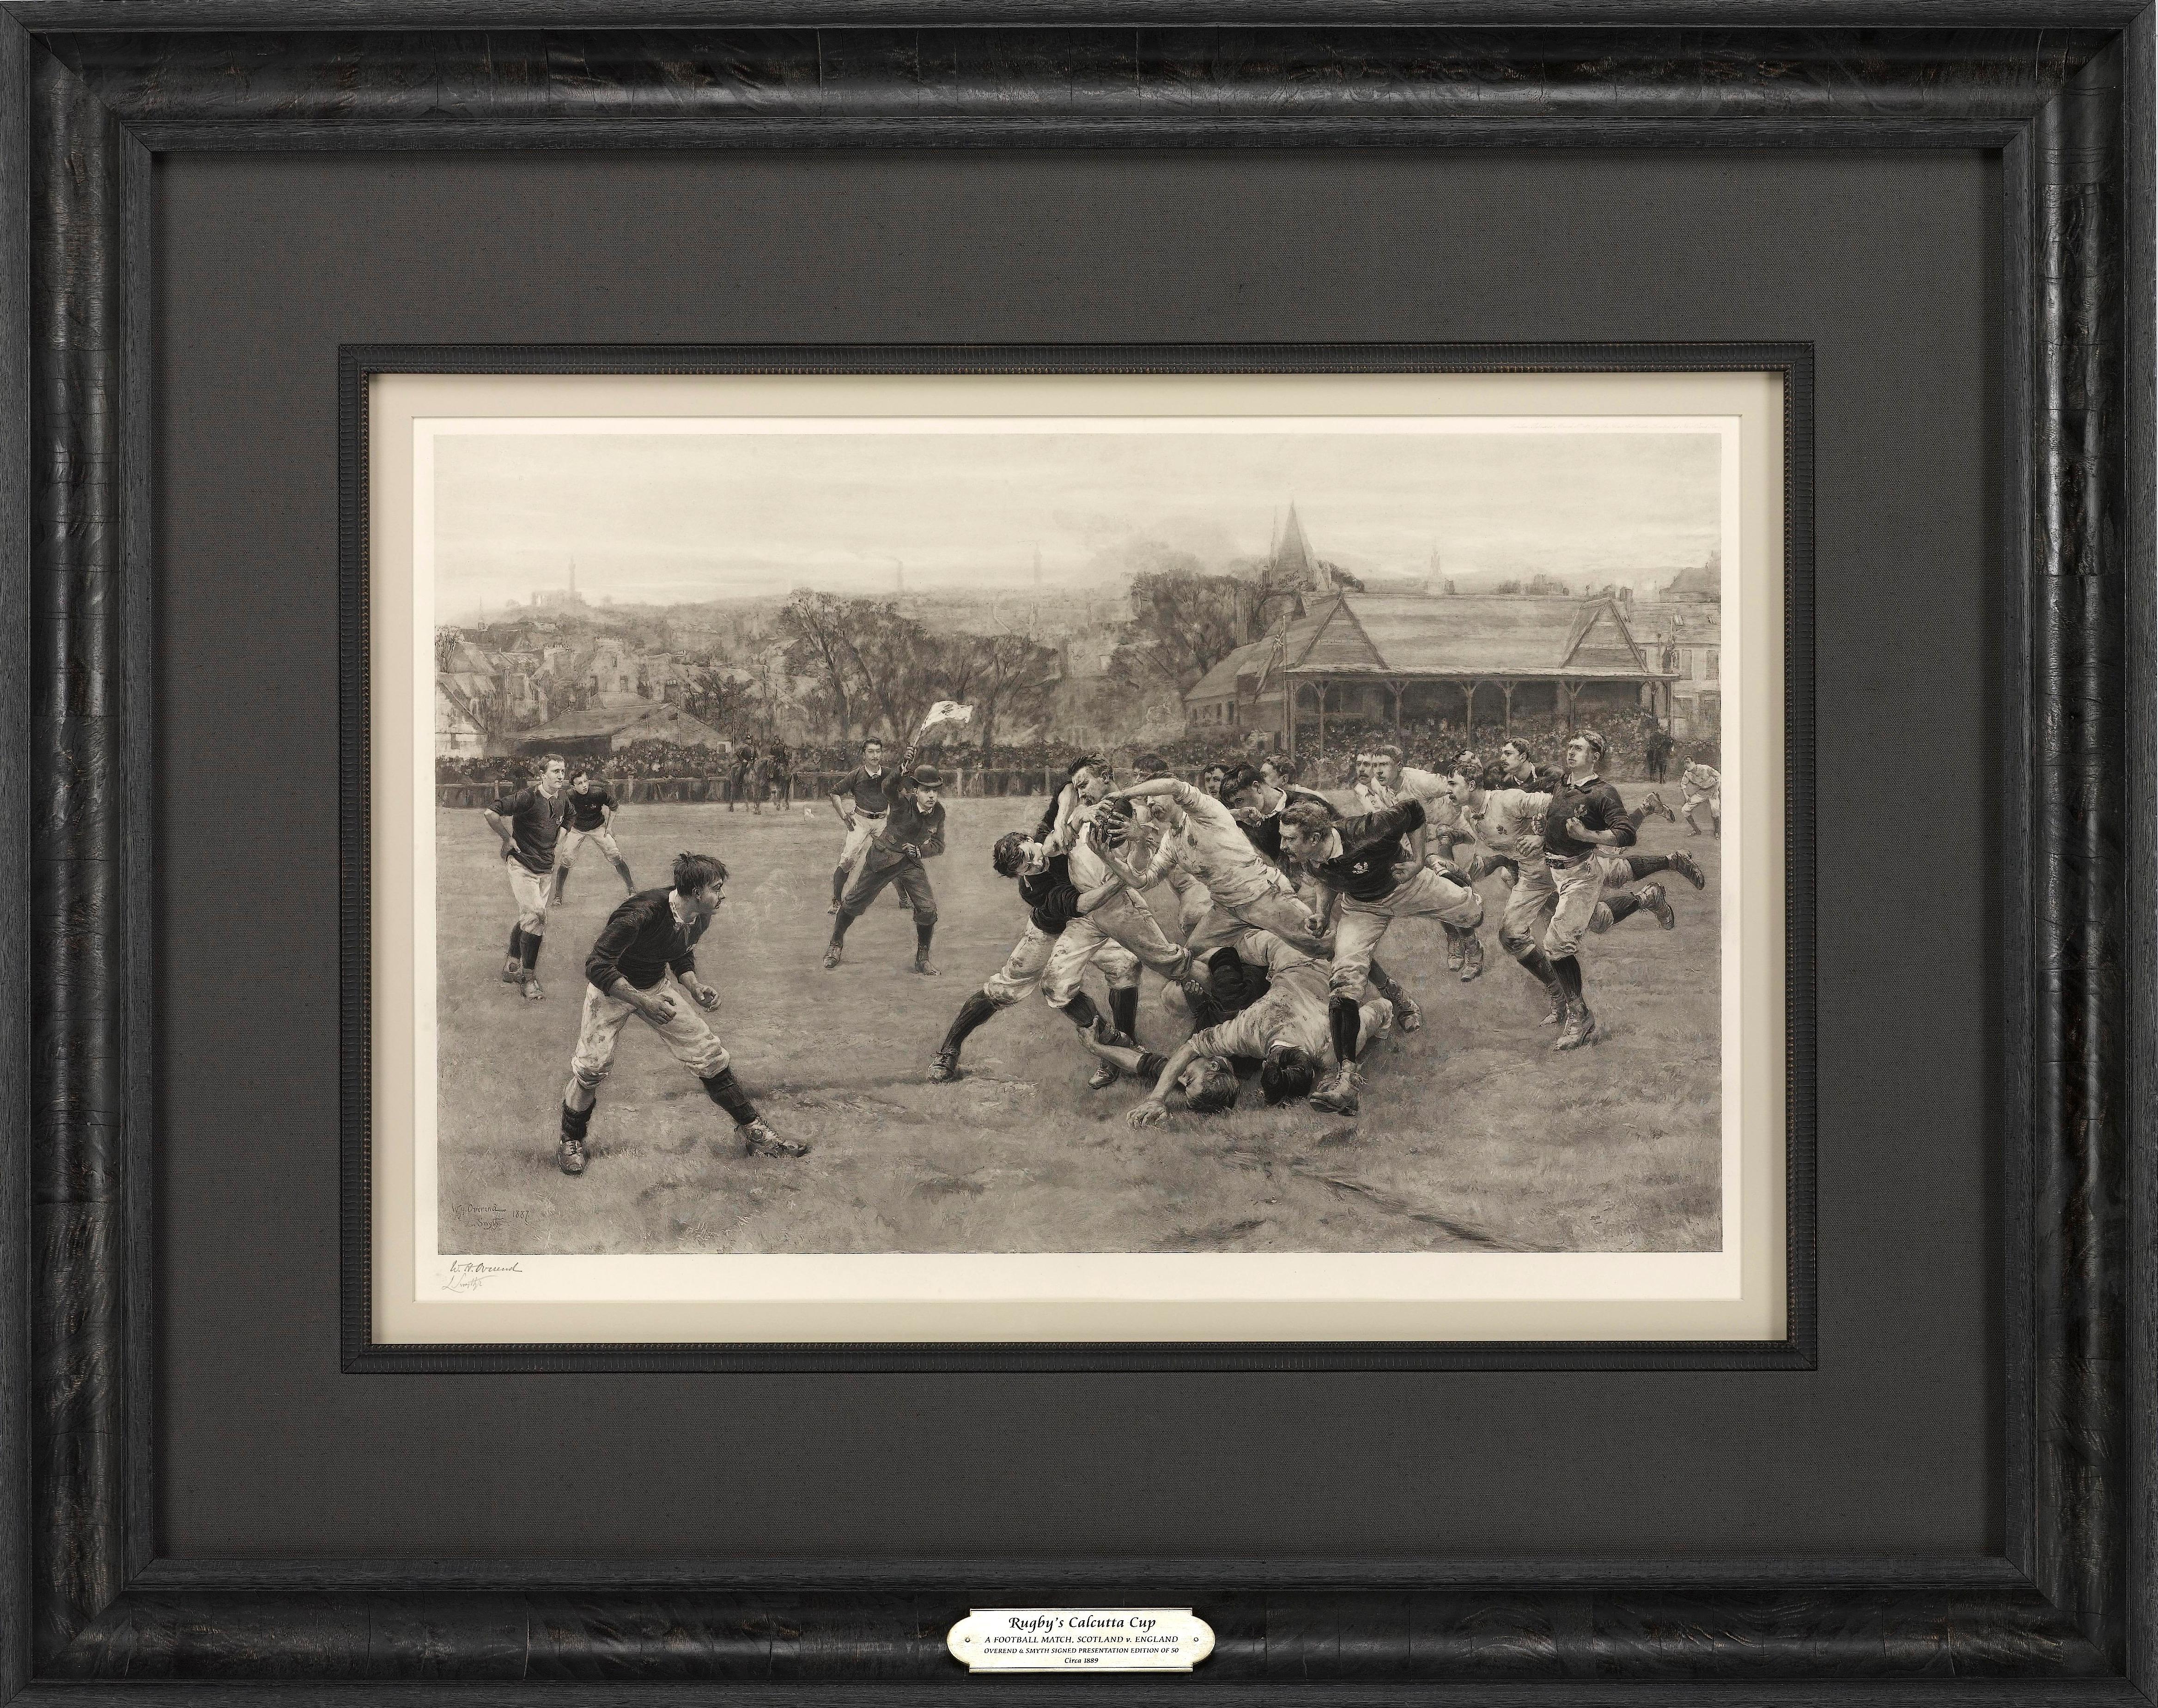 This is the 1889 William H. Overend (1851-1898) and Lionel Smythe (1839-1918) first edition, photogravure of the Calcutta Cup – a Rugby match between Scotland and England, that has been played over 100 times, the first match taking place in 1879.